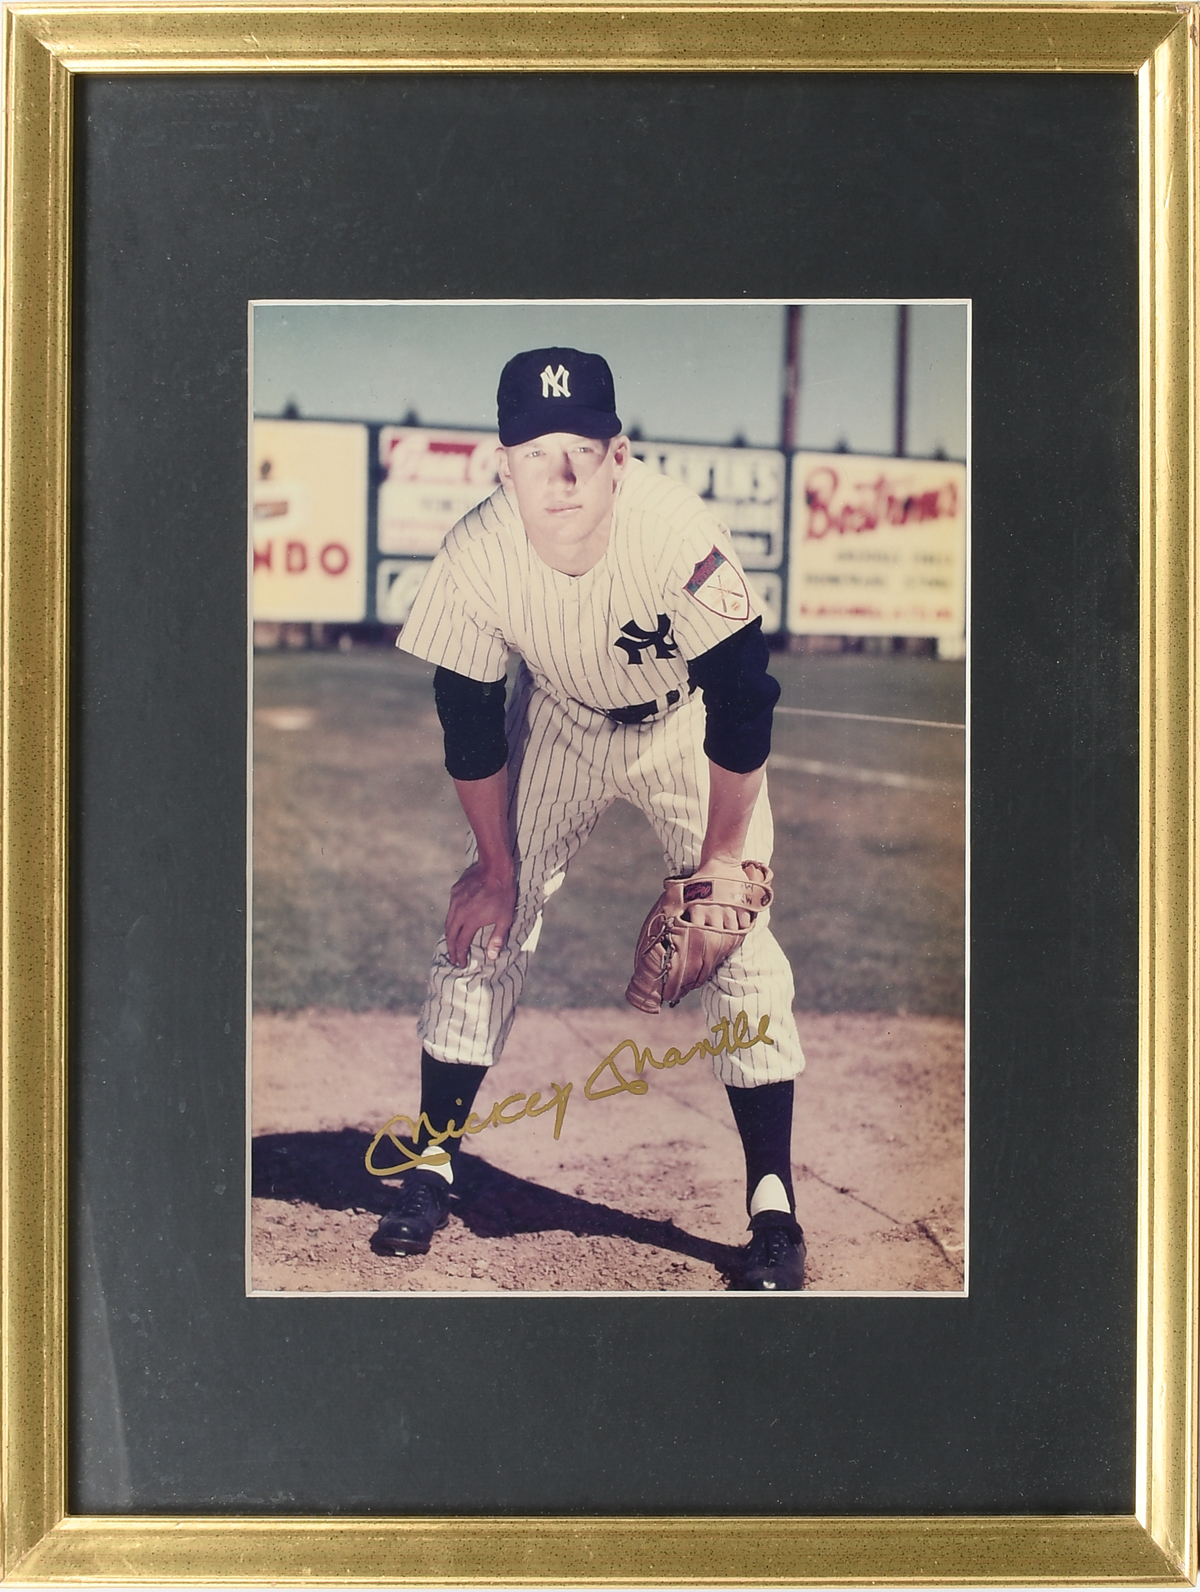 MICKEY MANTLE AUTOGRAPHED PHOTO: